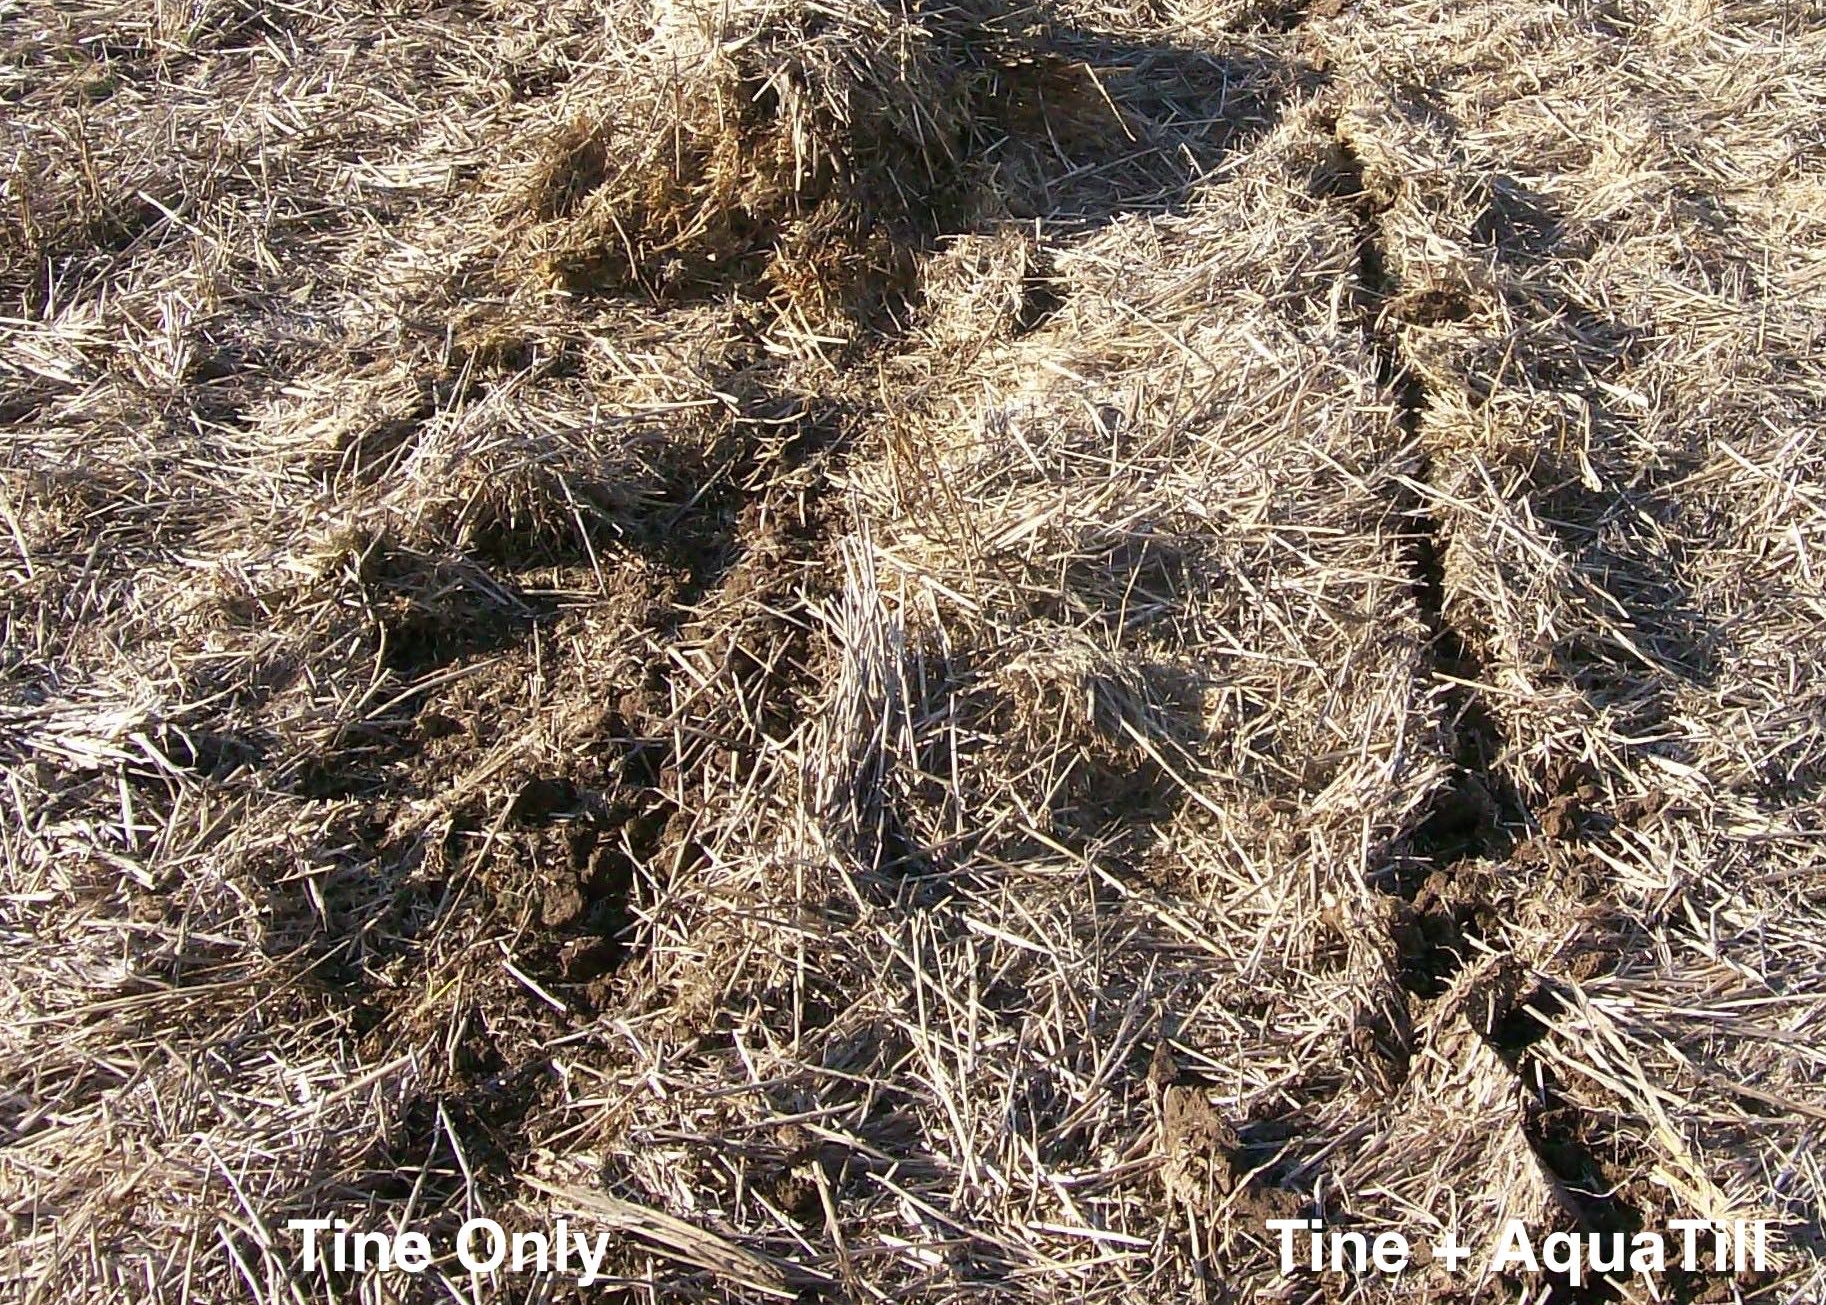 Knifepoint tine through windrow of 8T wheat crop Dubbo, without (left) and with (right) the liquid coulter website annotate.jpg